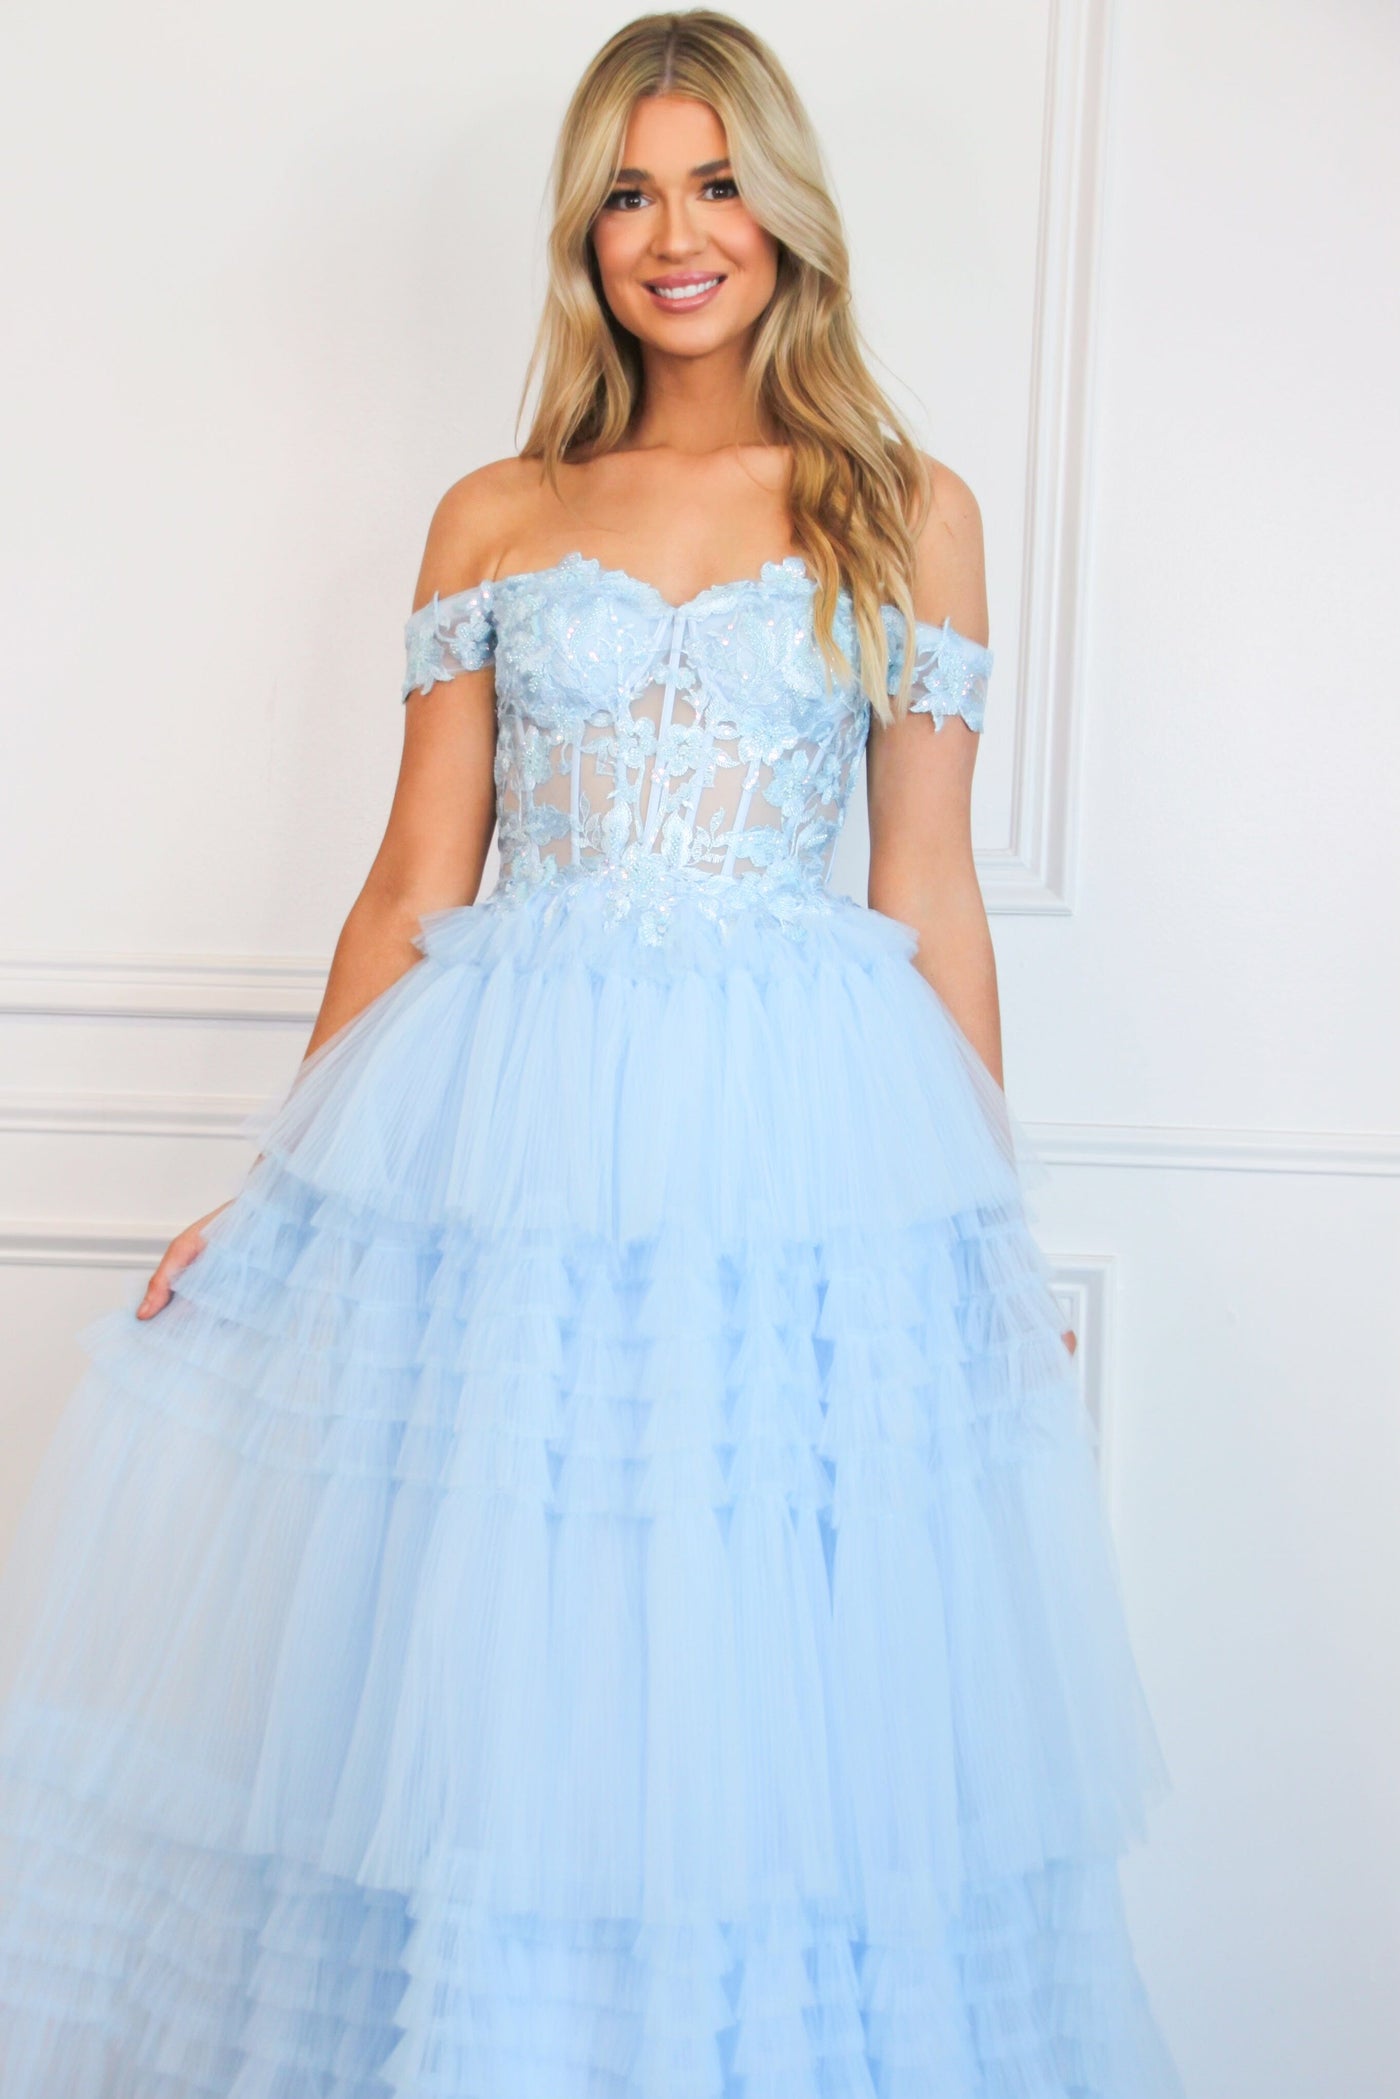 Vienna Sparkly Lace Bustier Tulle Ruffle Formal Dress: Light Blue - Bella and Bloom Boutique